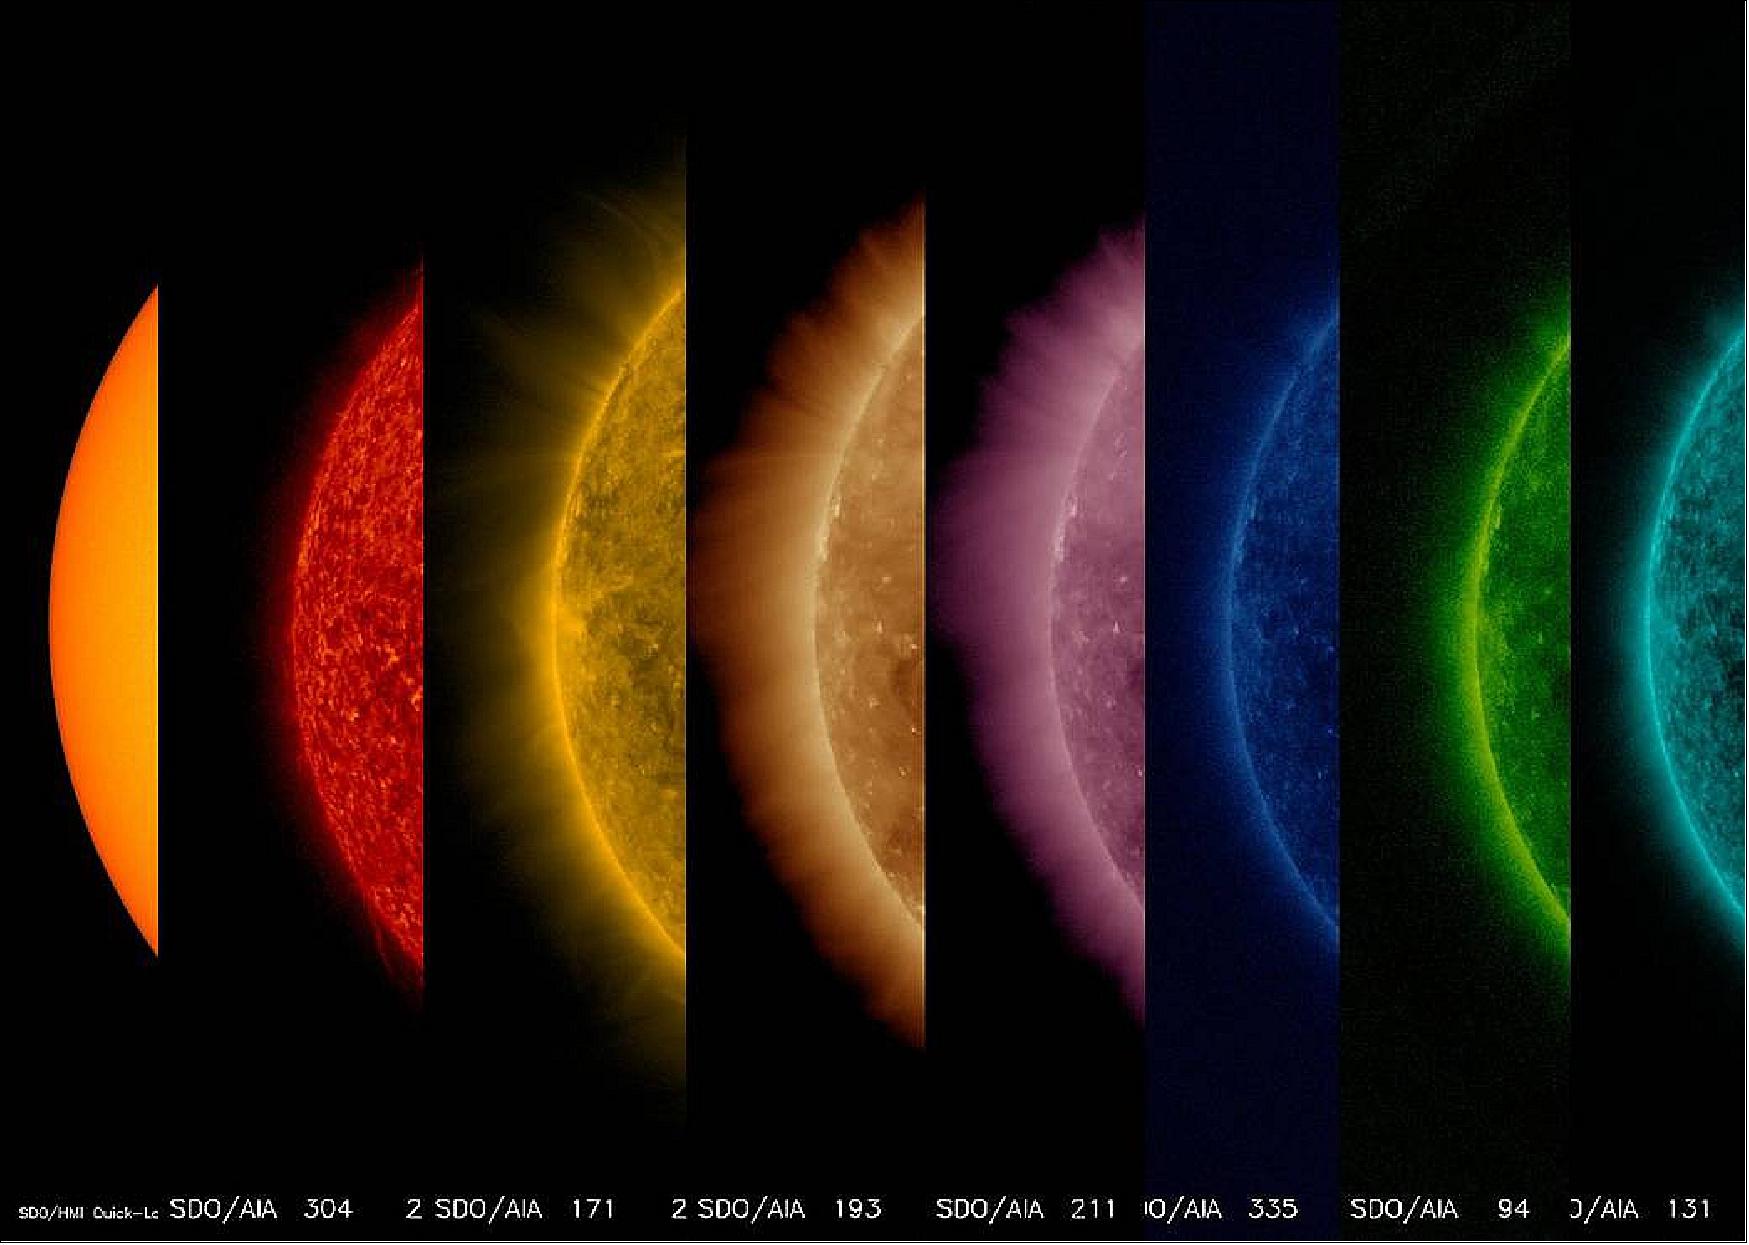 Figure 8: On 27 Oct. 2017, the AIA (Atmospheric Imaging Assembly) instrument on SDO captured this image sequence of the Sun from its surface (left) to its upper atmosphere (right) in different wavelengths (image credit: NASA/GSFC/SDO)